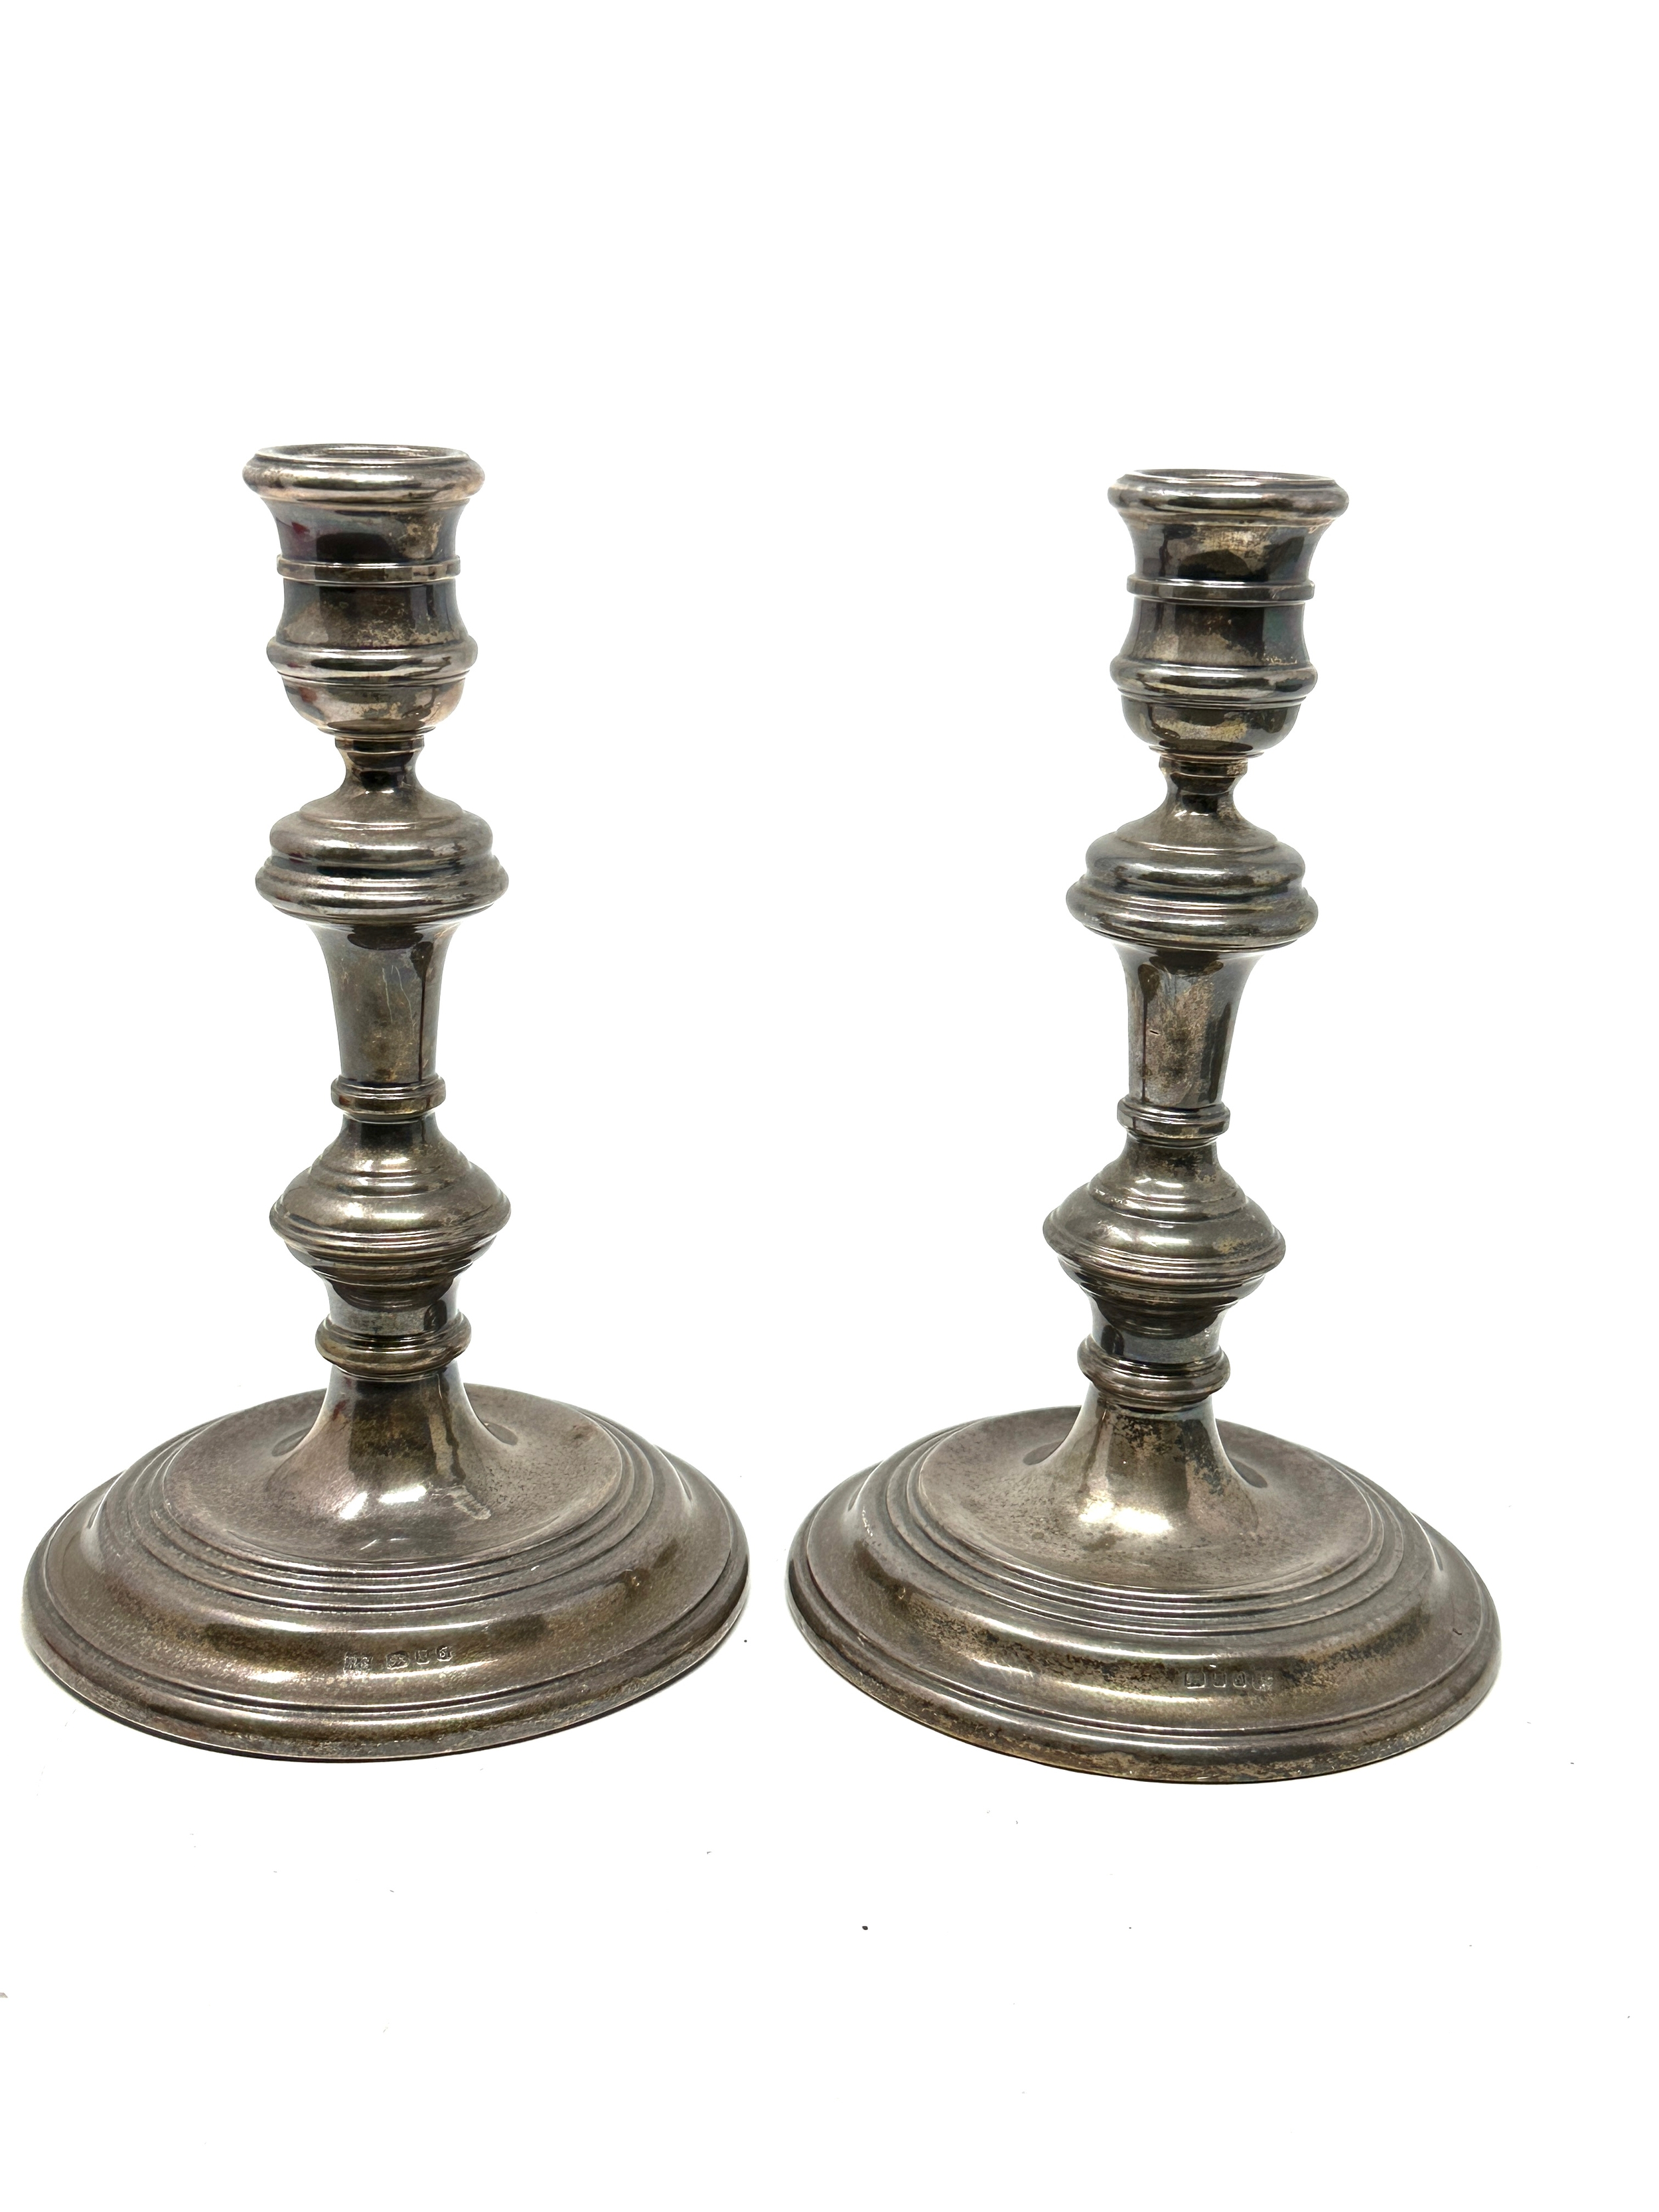 Vintage silver candlesticks London silver hallmarks measure approx height 16.5cm - Image 2 of 4